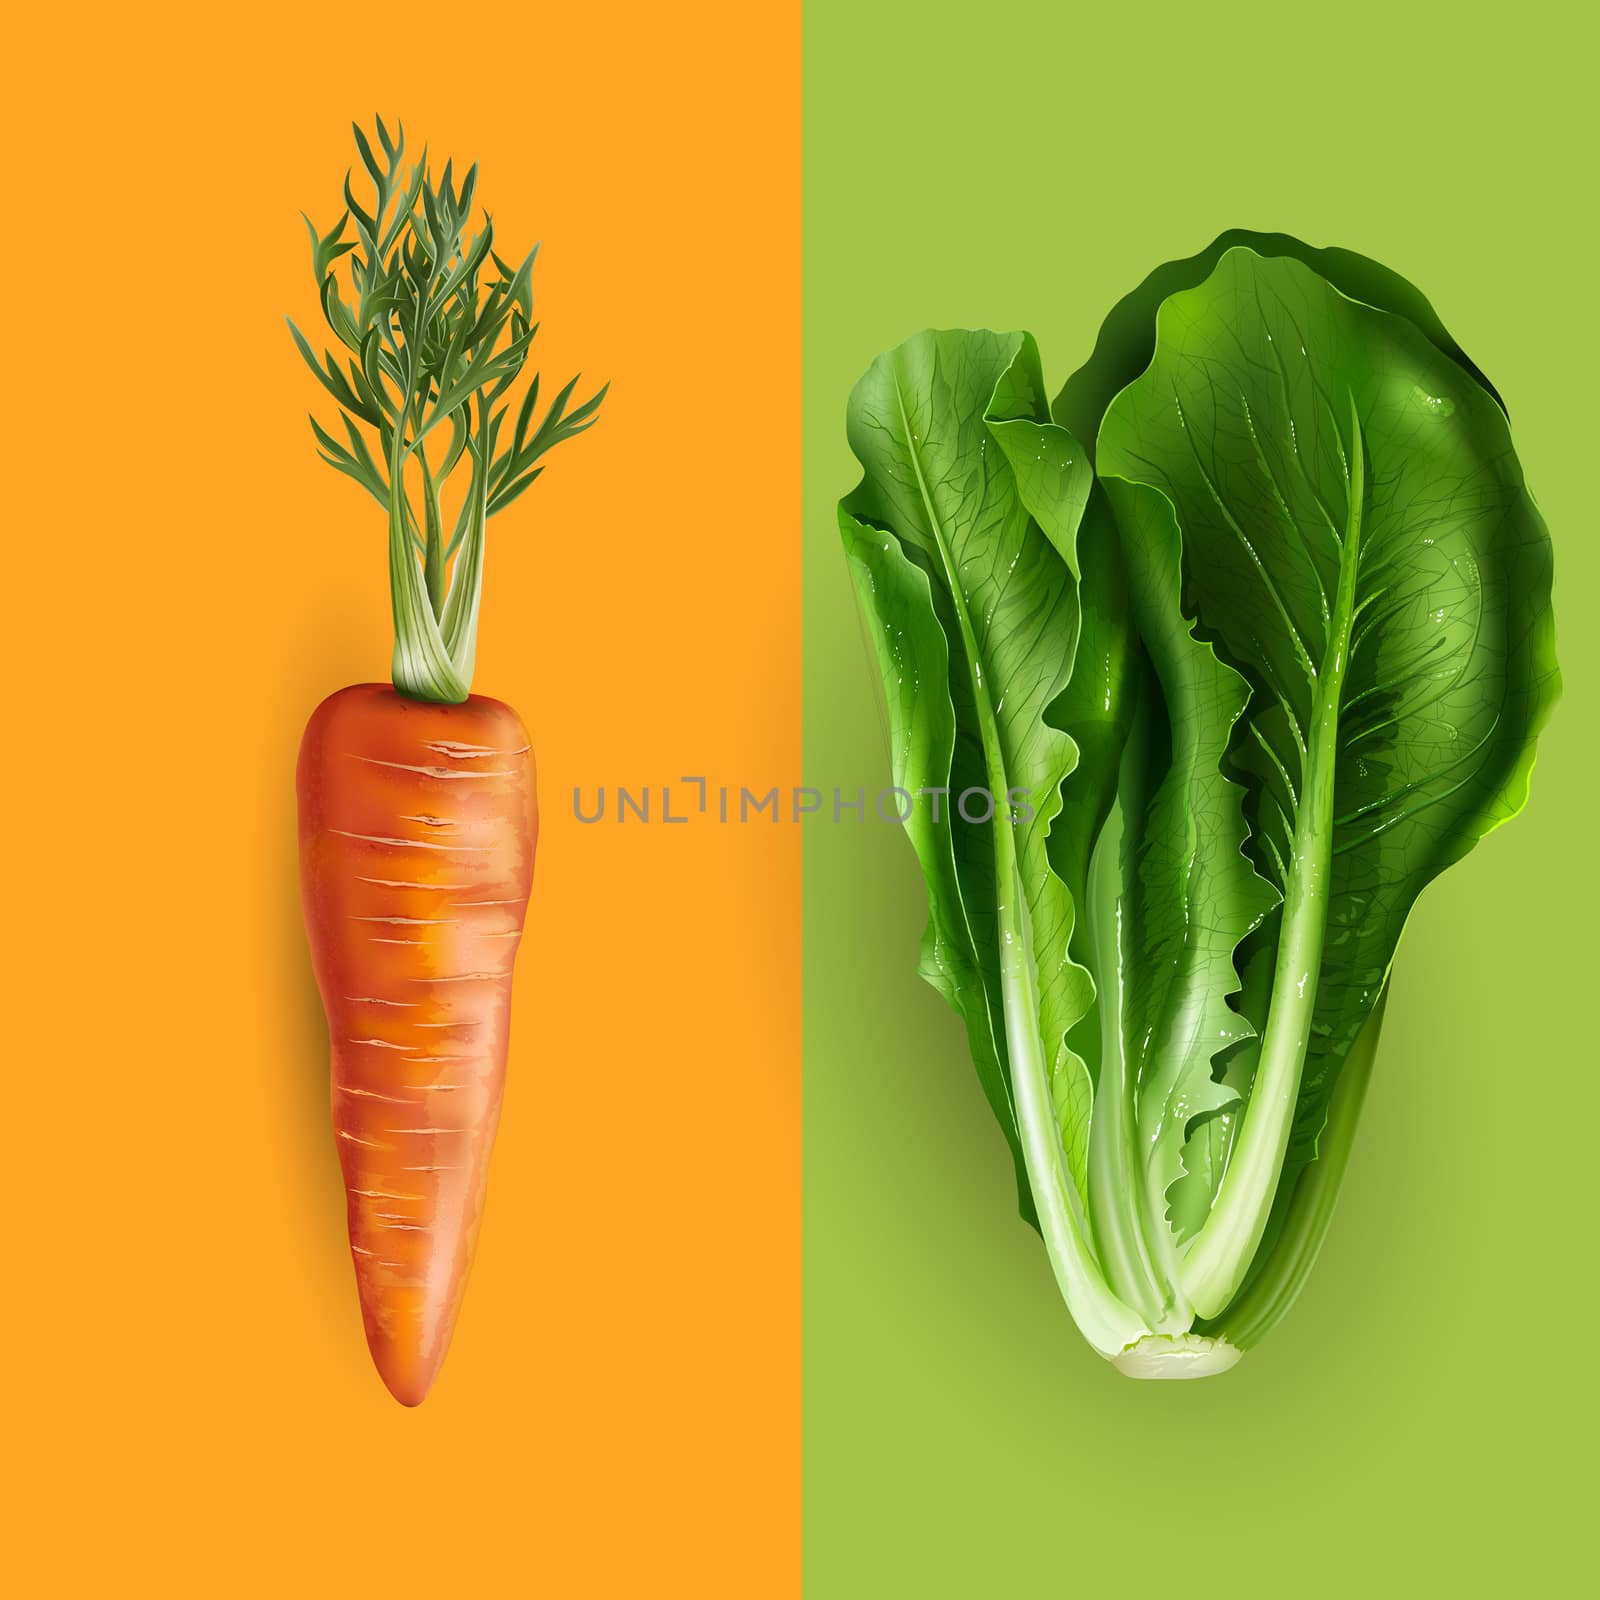 Carrot and lettuce illustration by ConceptCafe